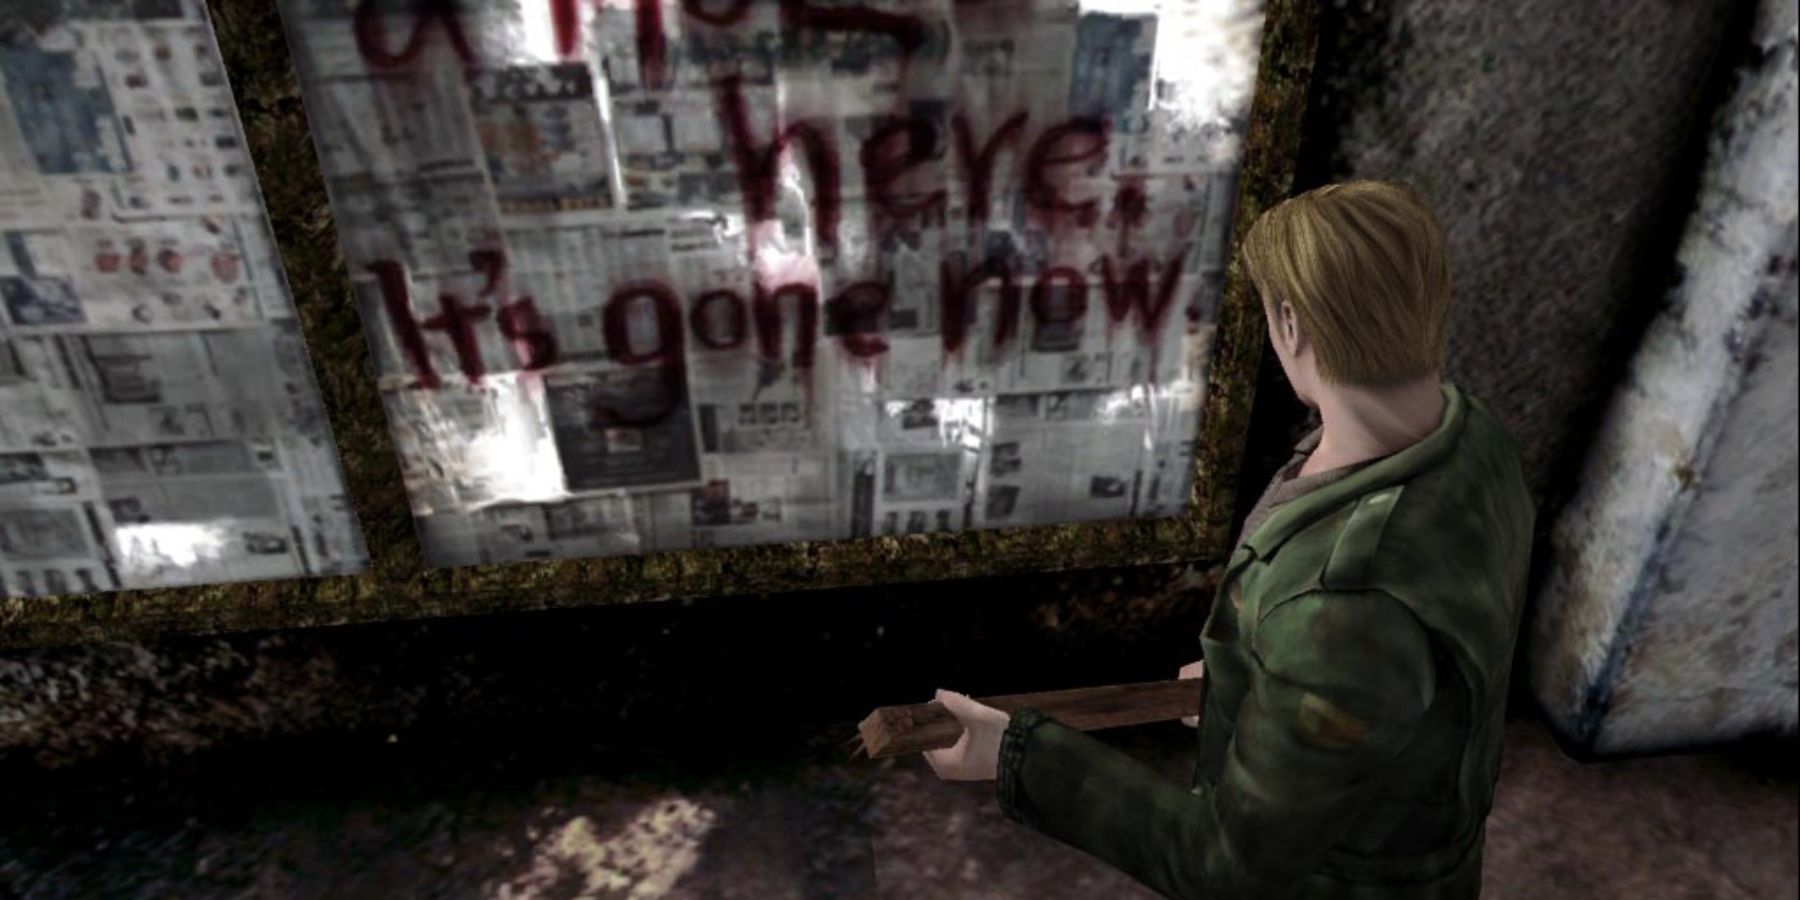 James Sunderland looking at a window in Silent Hill 2 